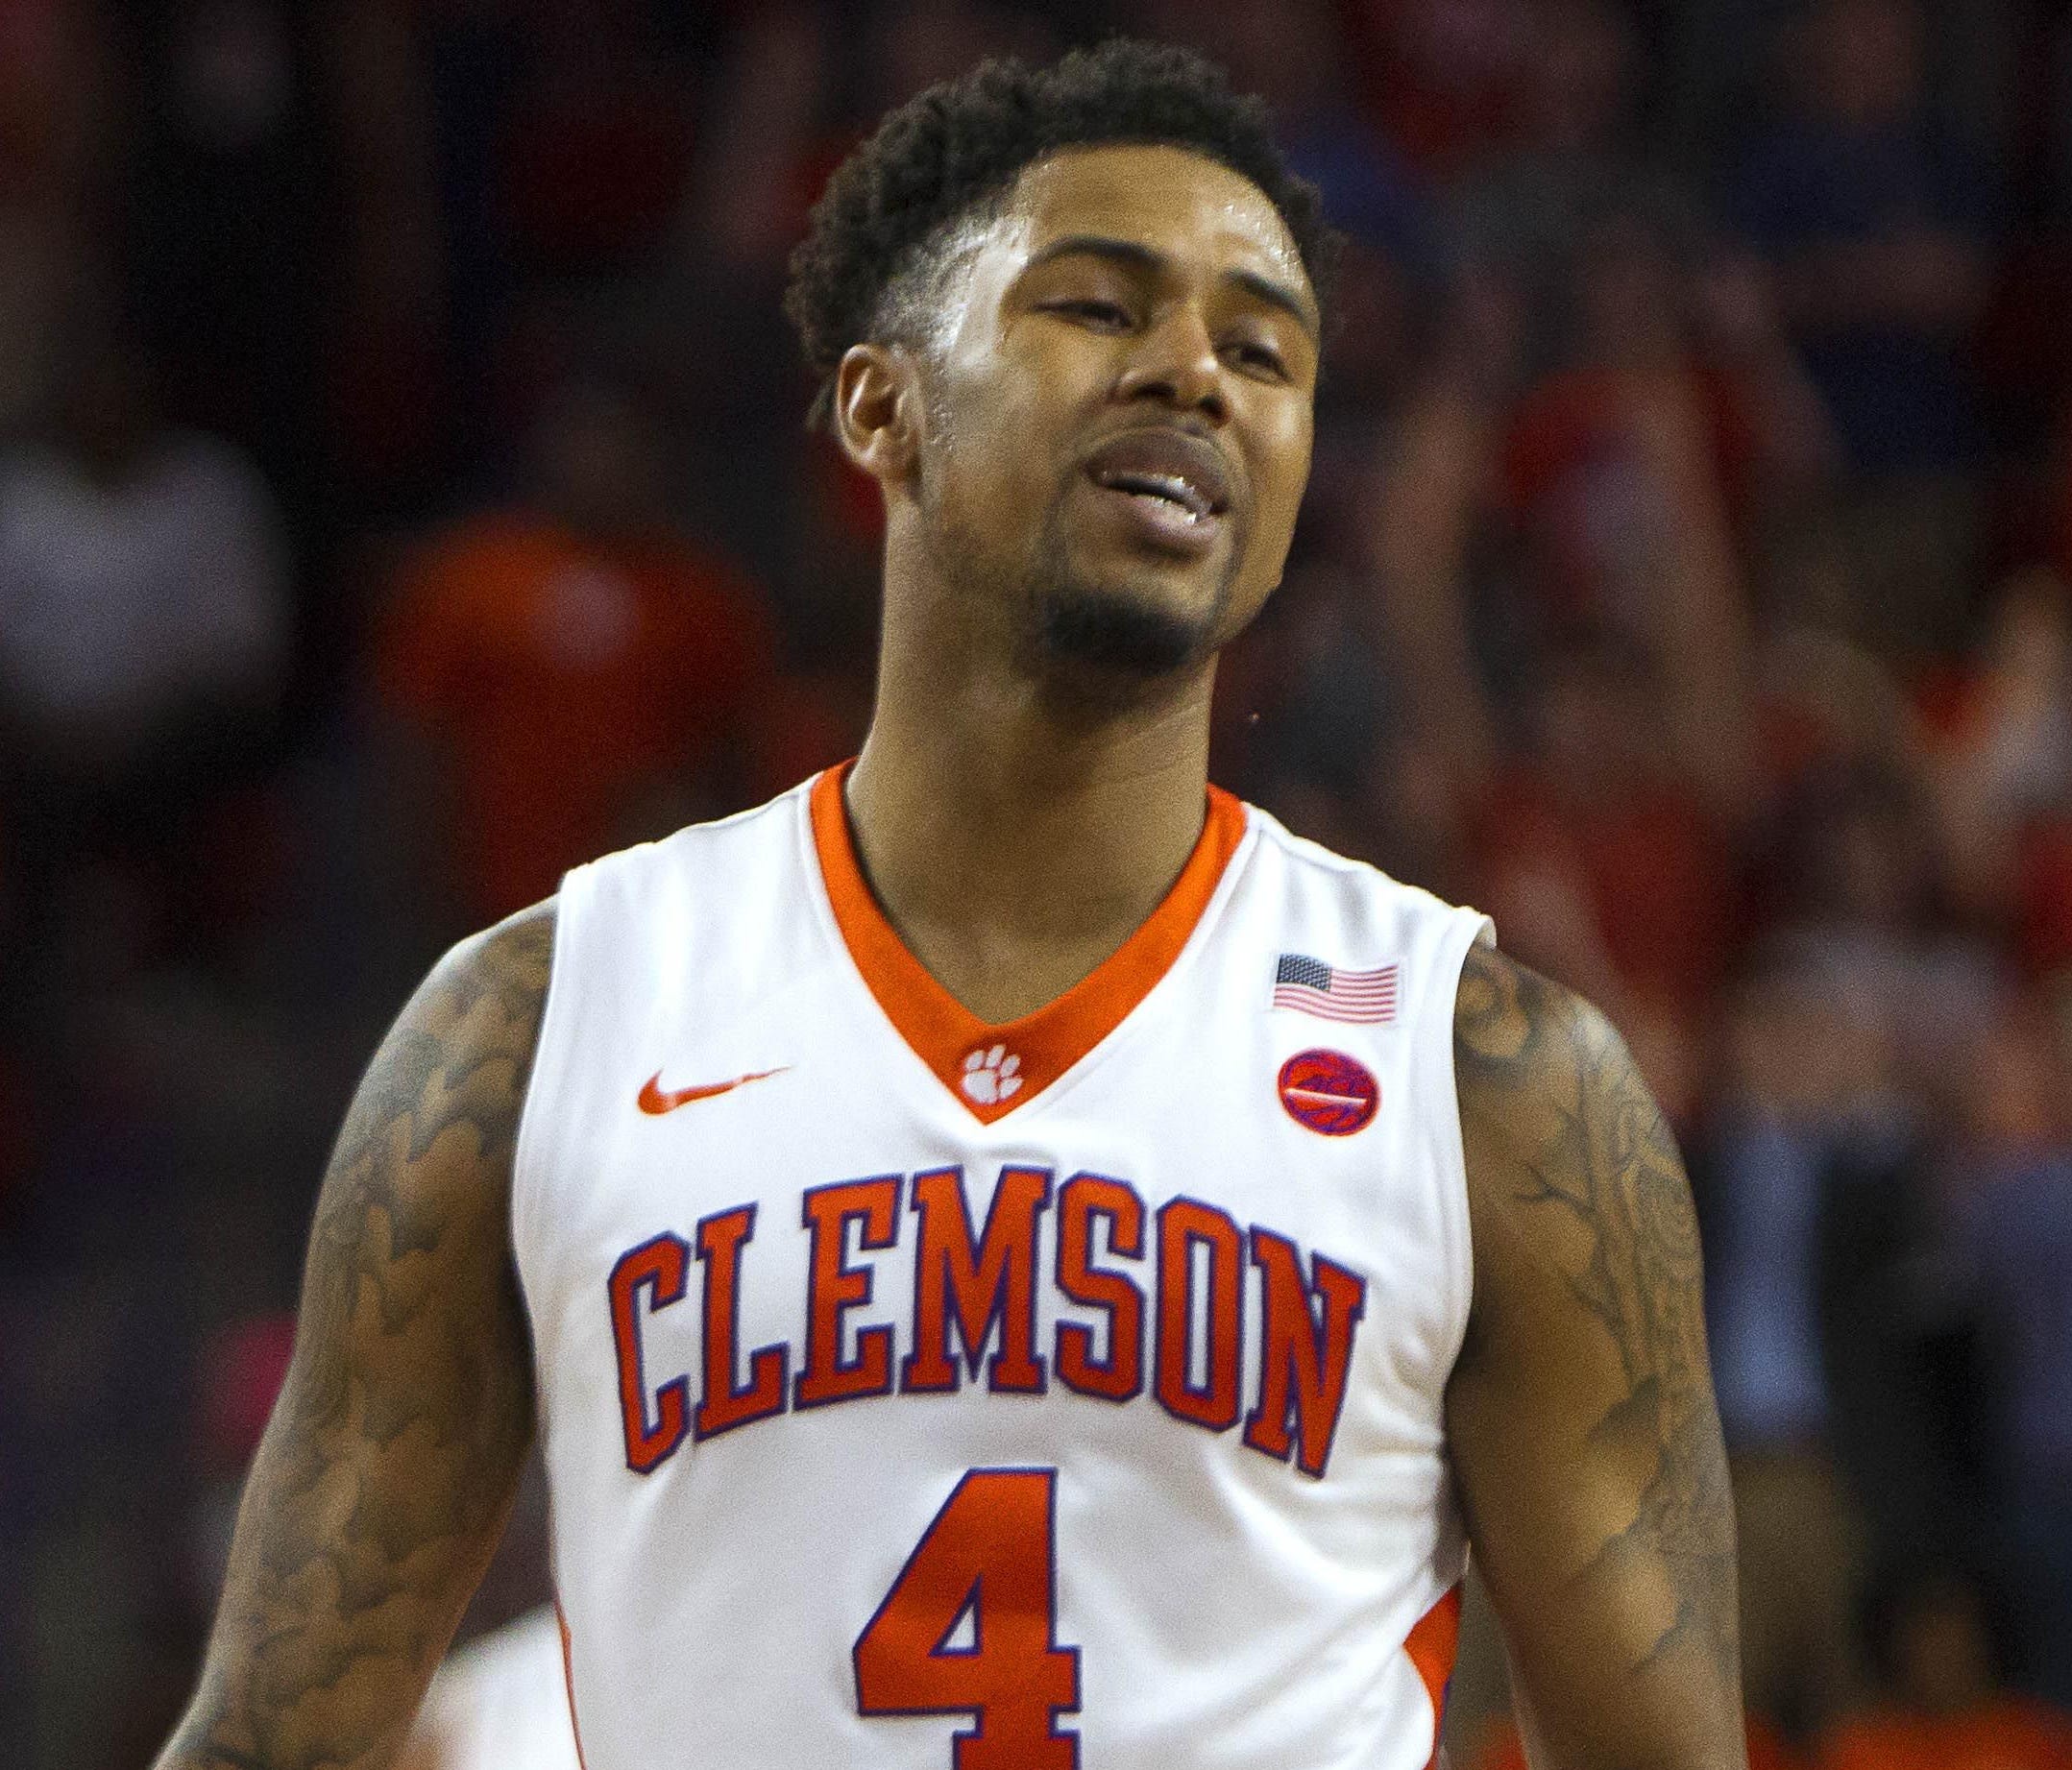 Clemson has won just four games in ACC play but remains on the bubble.